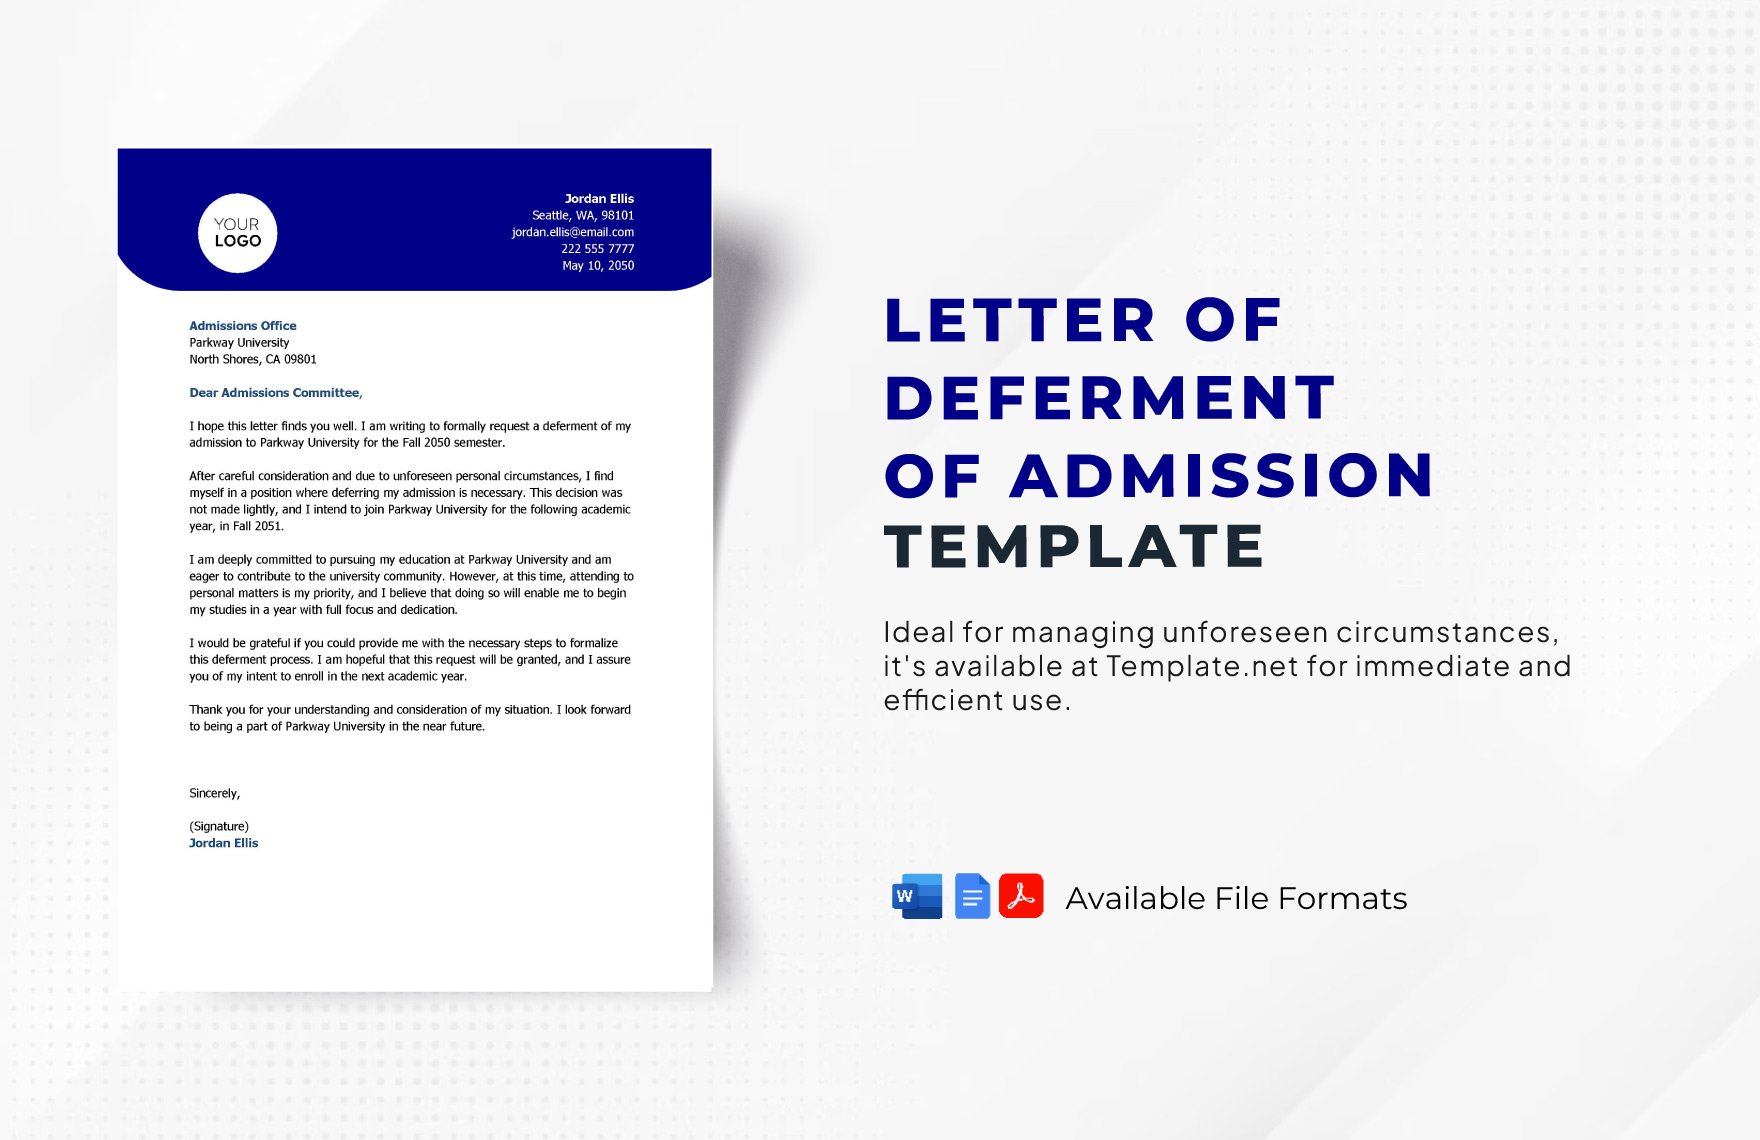 Letter of Deferment of Admission Template